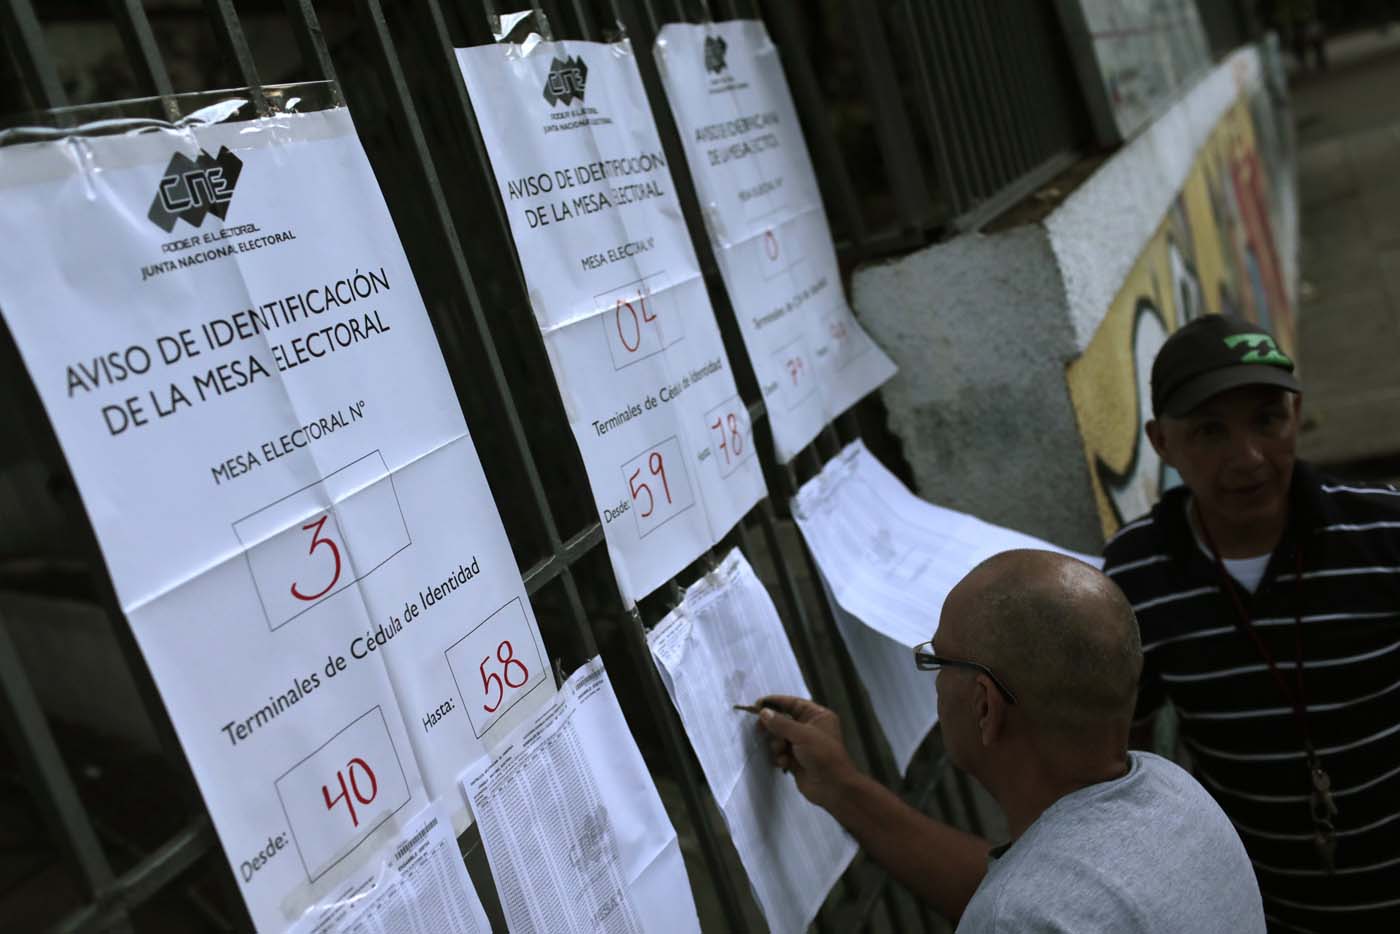 People check electoral lists before voting during the Constituent Assembly election in Caracas, Venezuela, July 30, 2017. REUTERS/Marco Bello